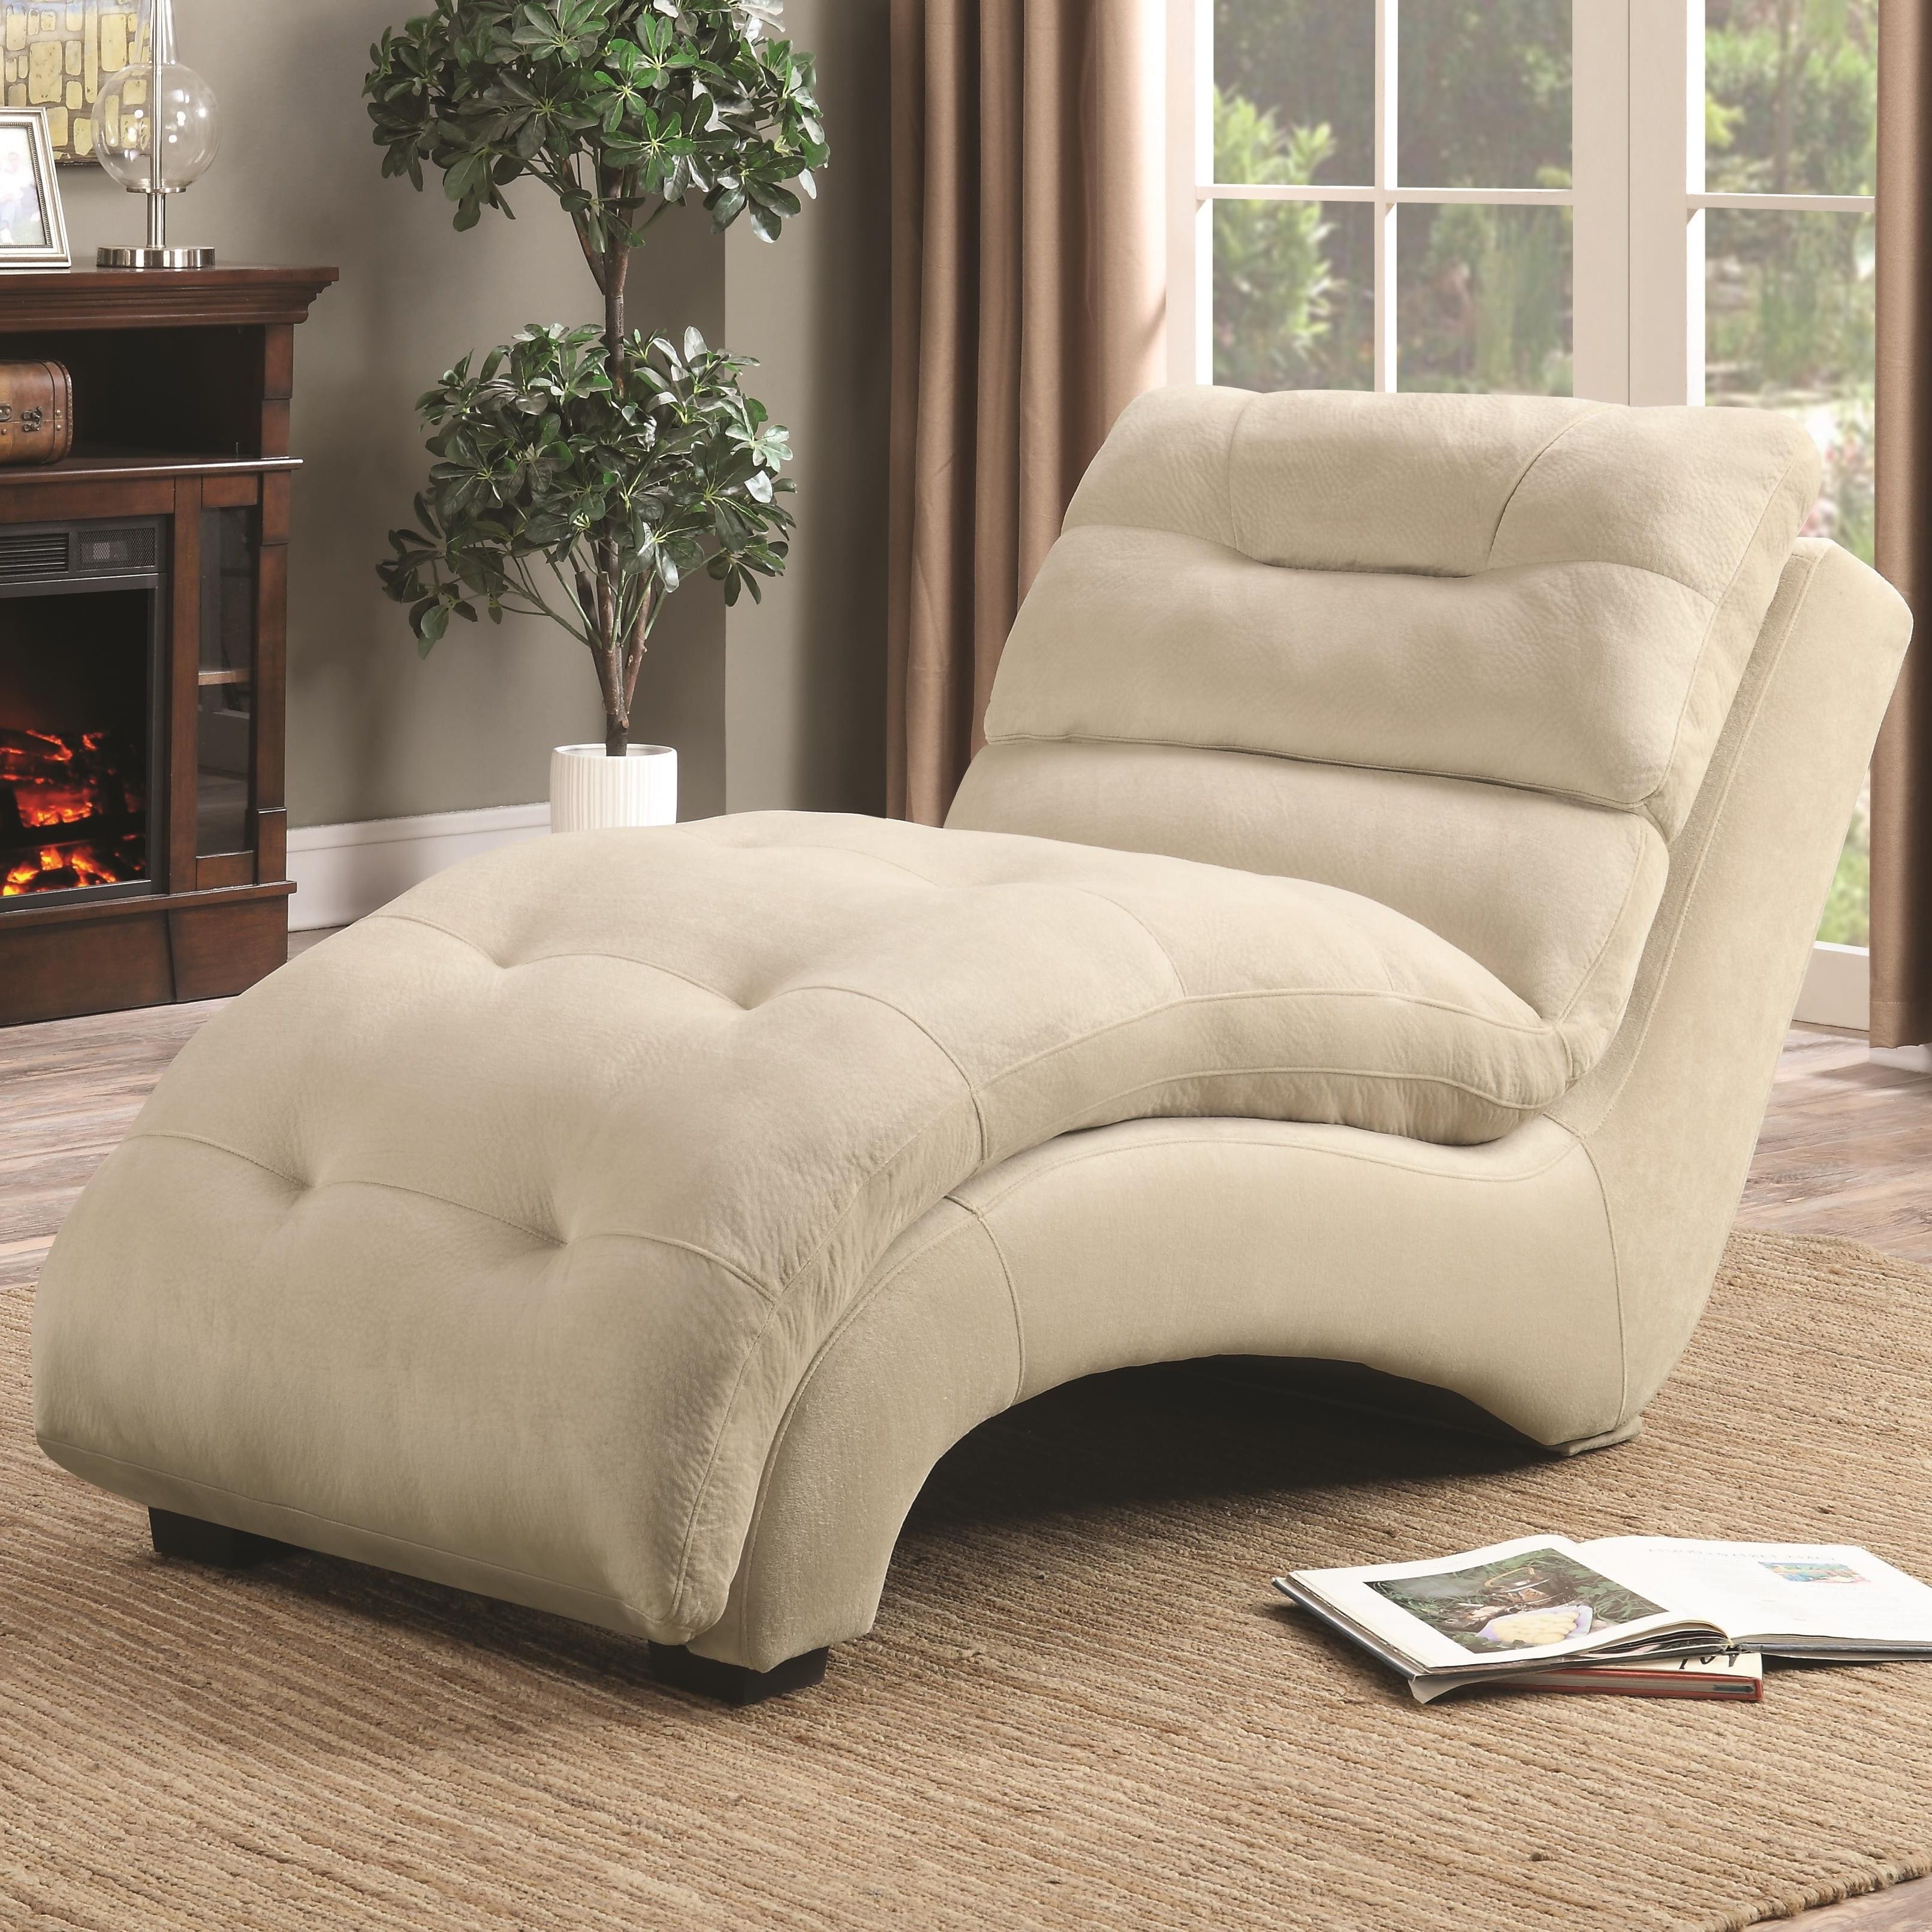 Coaster 550347 Accent Chaise With Arched Base In Tan Padded Upholstery Throughout Most Popular Coaster Chaise Lounges (Photo 1 of 15)